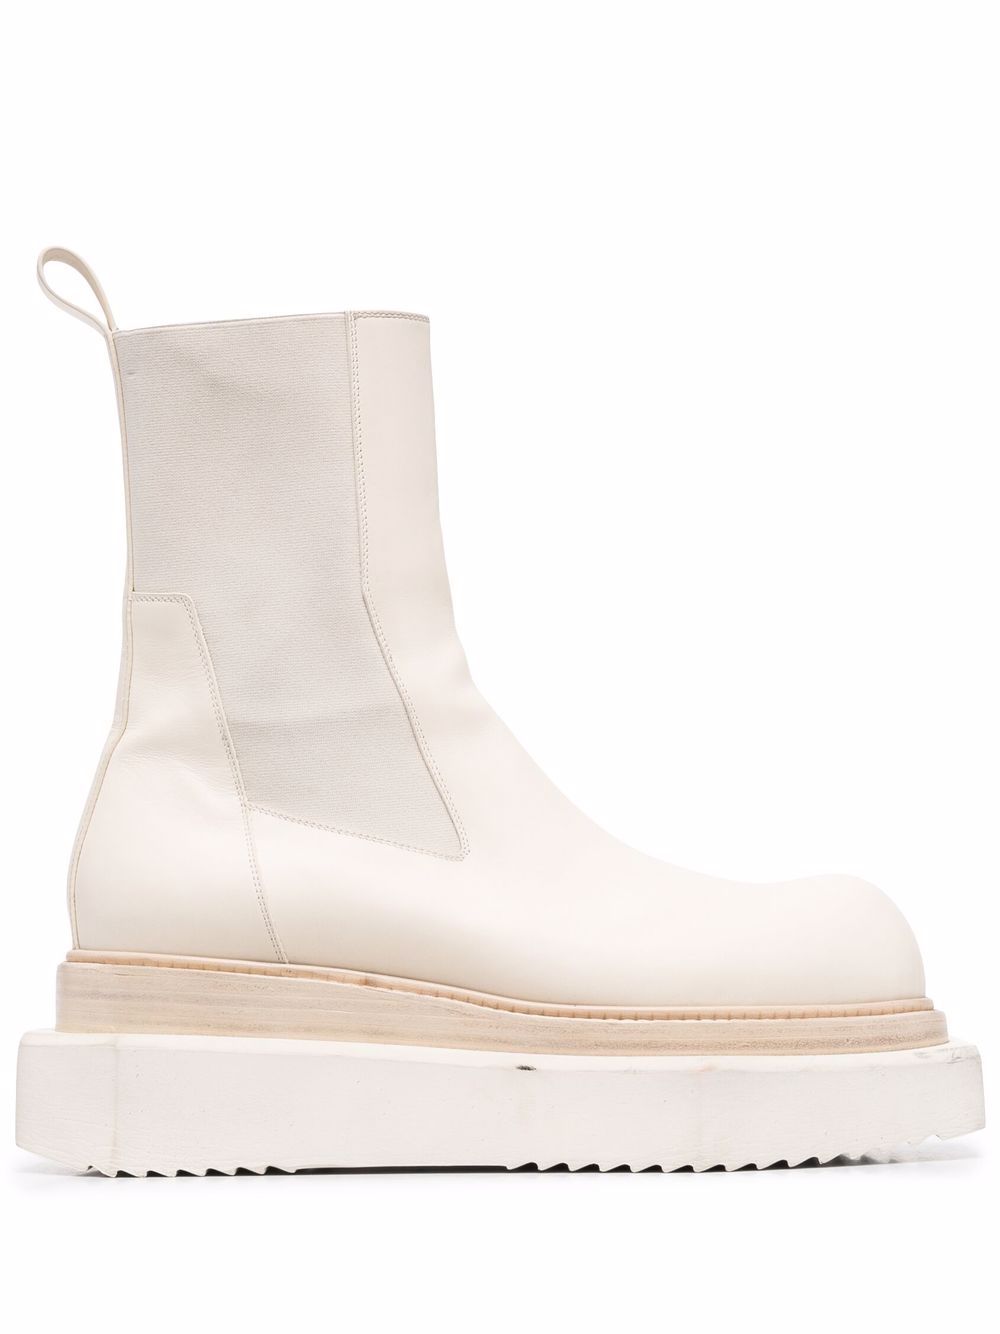 Rick Owens Turbo Cyclops Ankle Boots - Farfetch